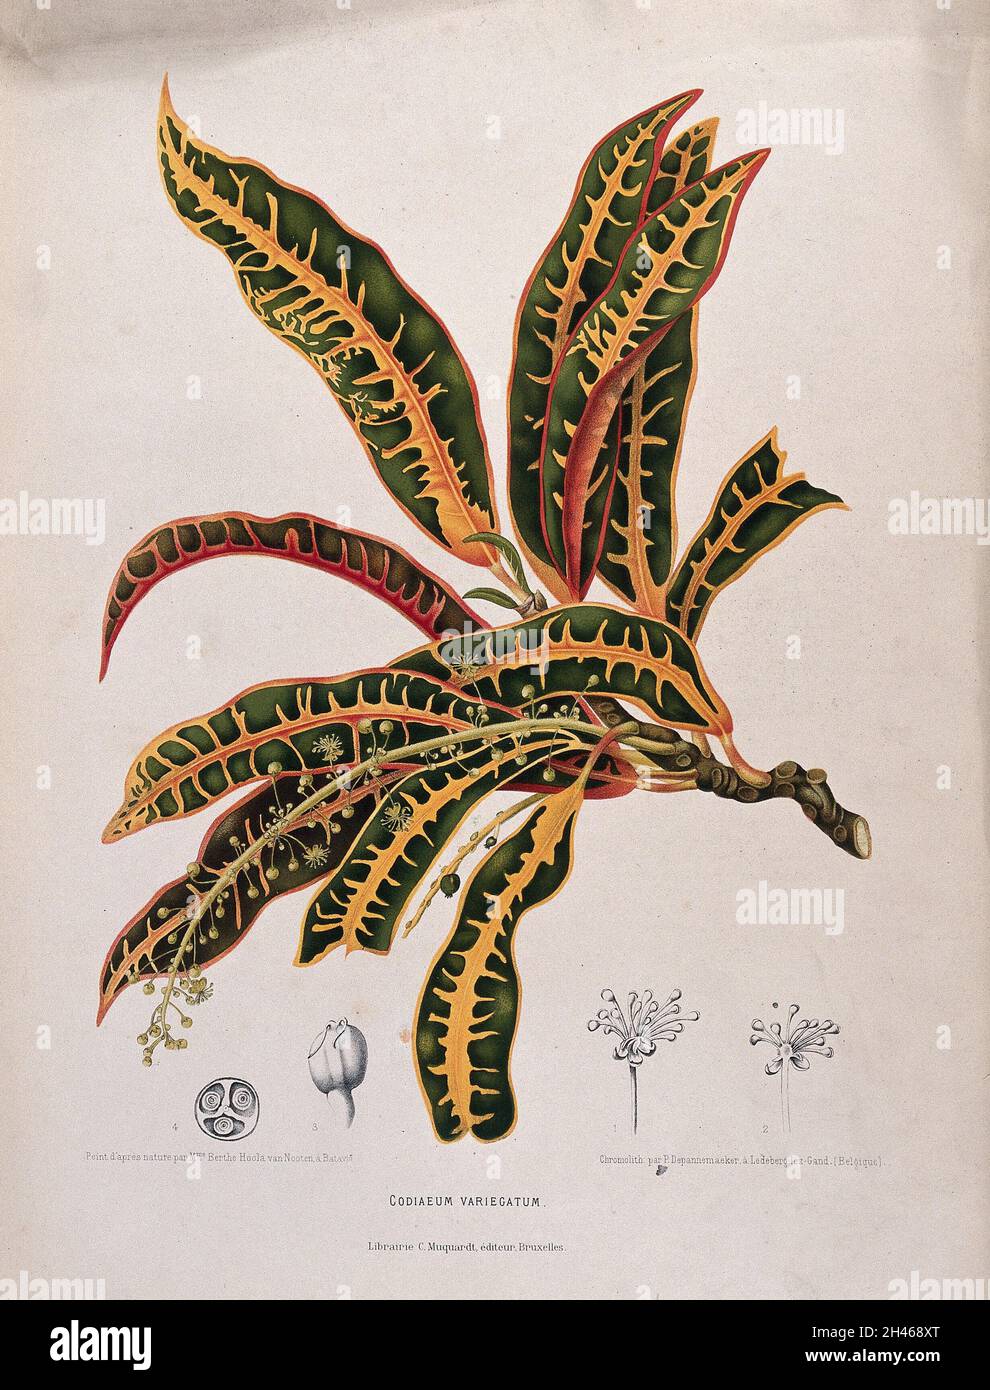 Croton (Codiaeum variegatum (L.) Blume): flowering and fruiting branch tip with separate, numbered fruit clusters and single fruit, both whole and sectioned. Chromolithograph by P. Depannemaeker, c.1885, after B. Hoola van Nooten. Stock Photo